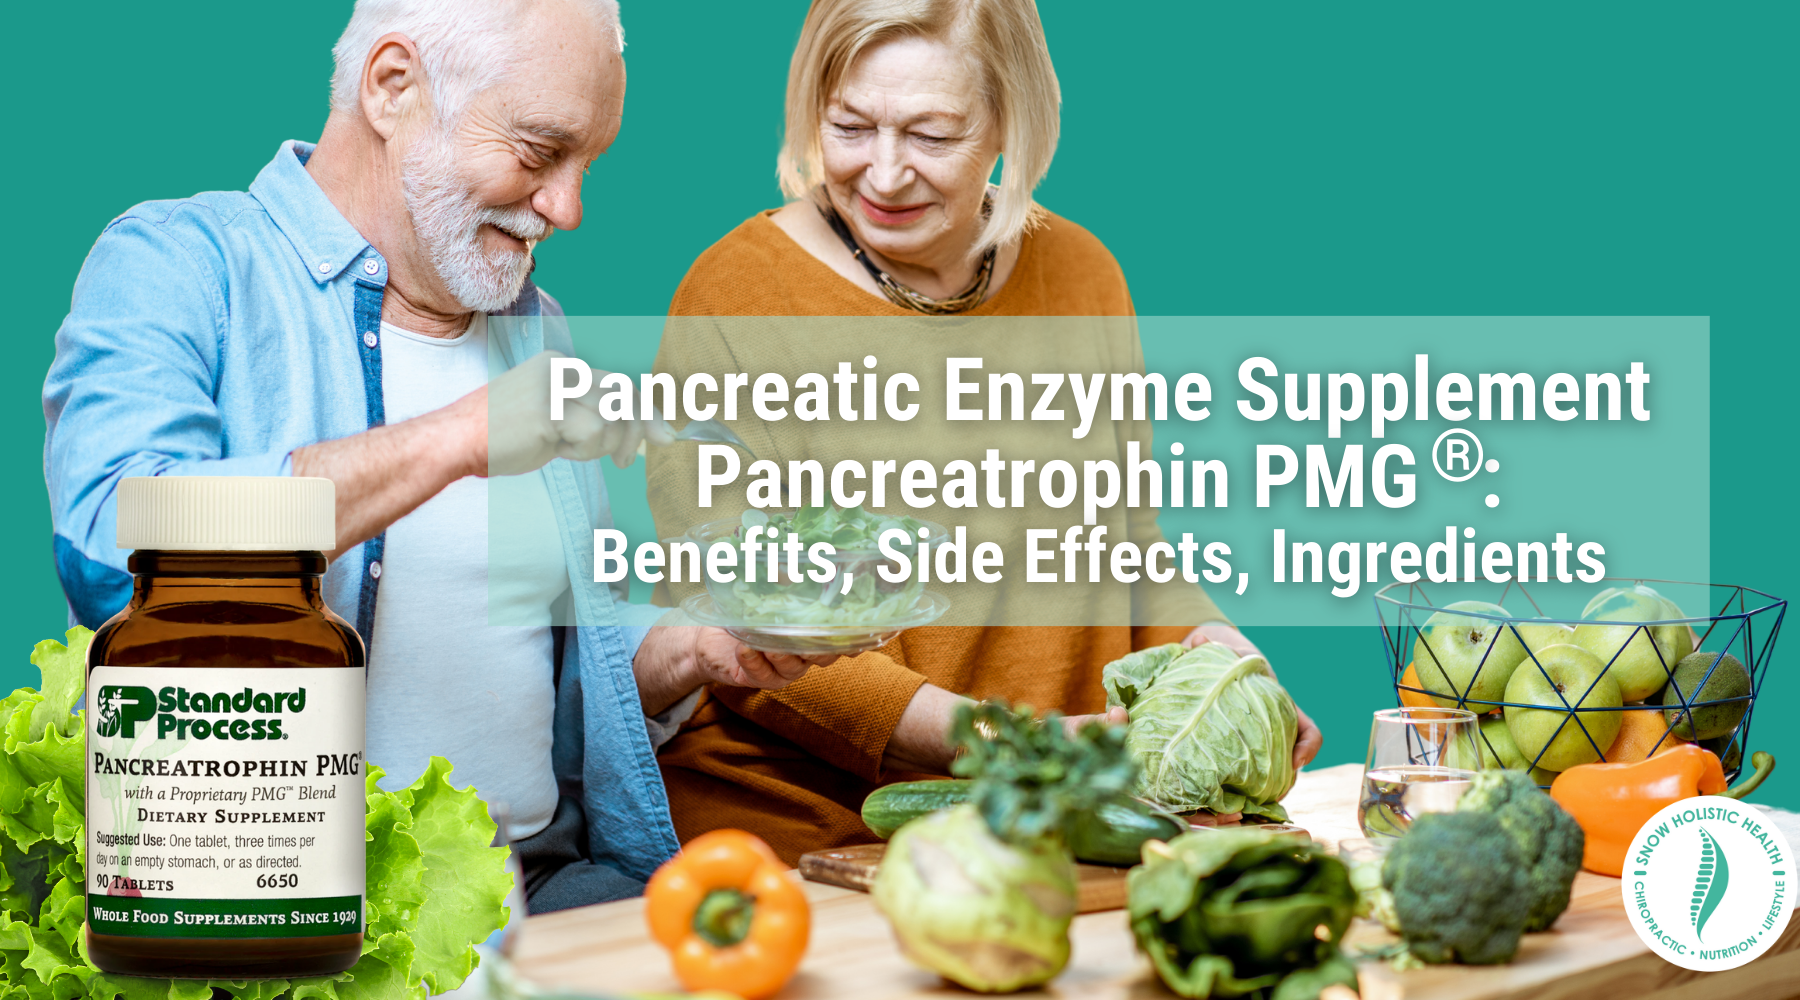 Image of an older couple cooking with caption "Pancreatic Enzyme Supplement Pancreatrophin PMG Benefits, Side Effects, Ingredients"